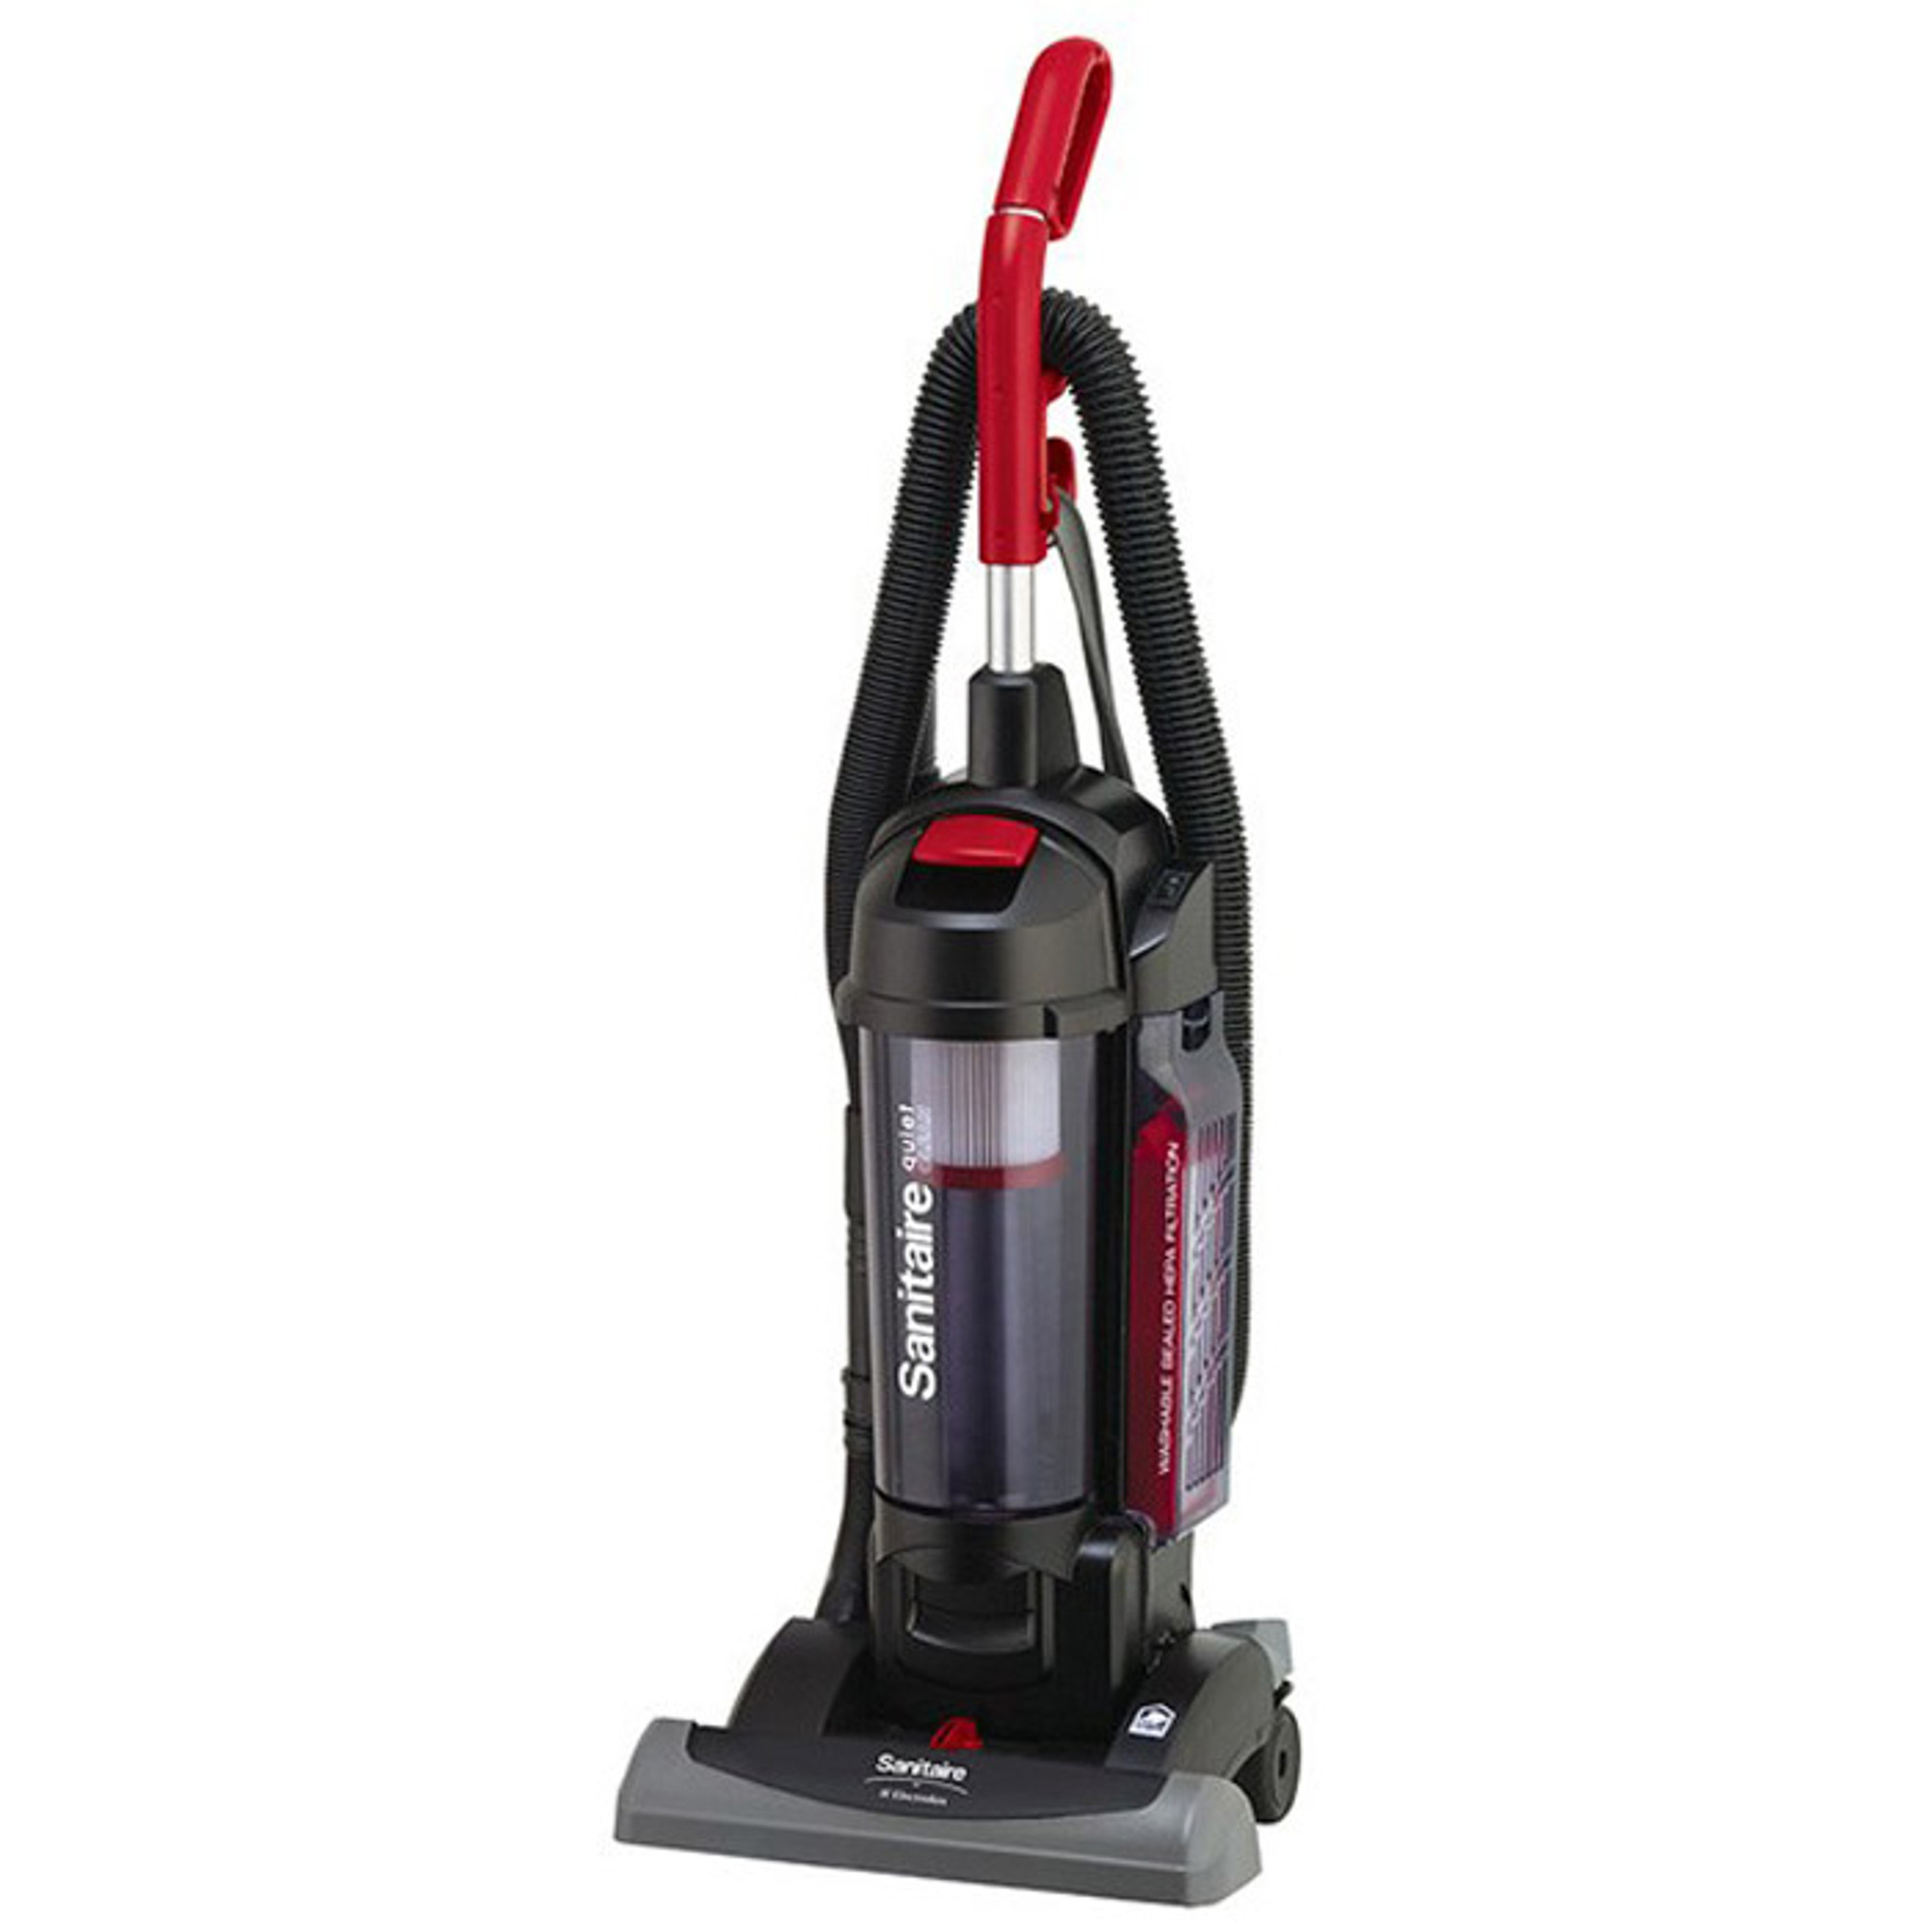 Commercial Bagless Upright Vacuum Cleaner: What are the common problems?